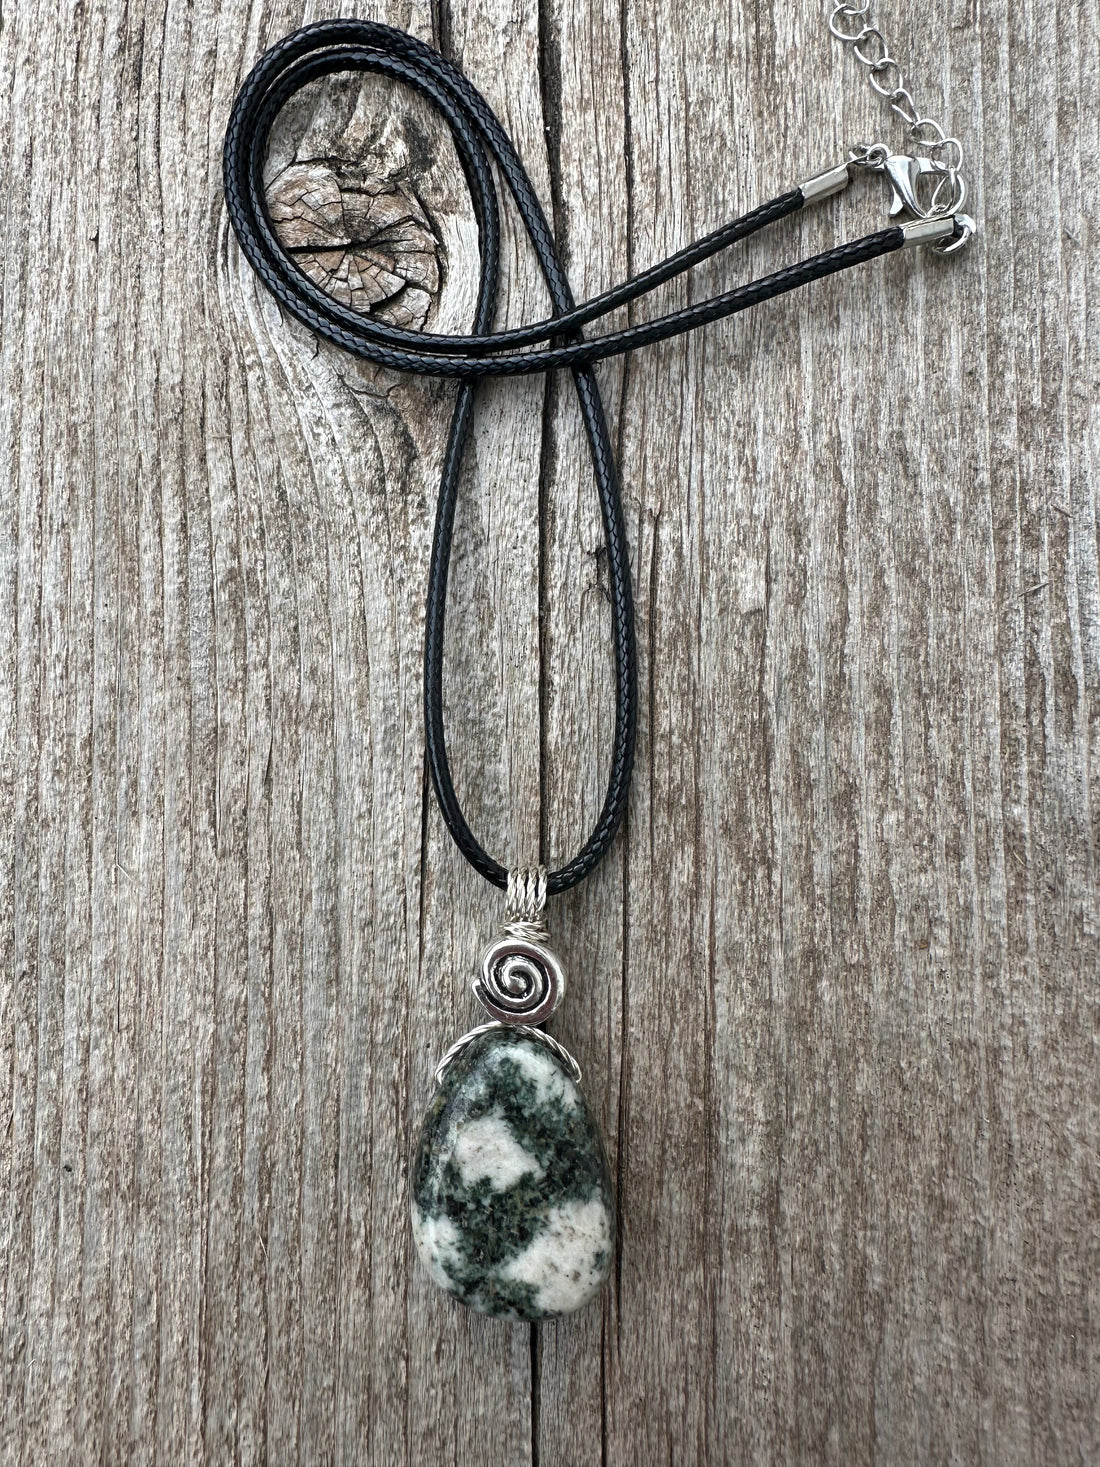 Preseli Bluestone Necklace for Protection & Psychic Growth. Spiral to Signify Consciousness.